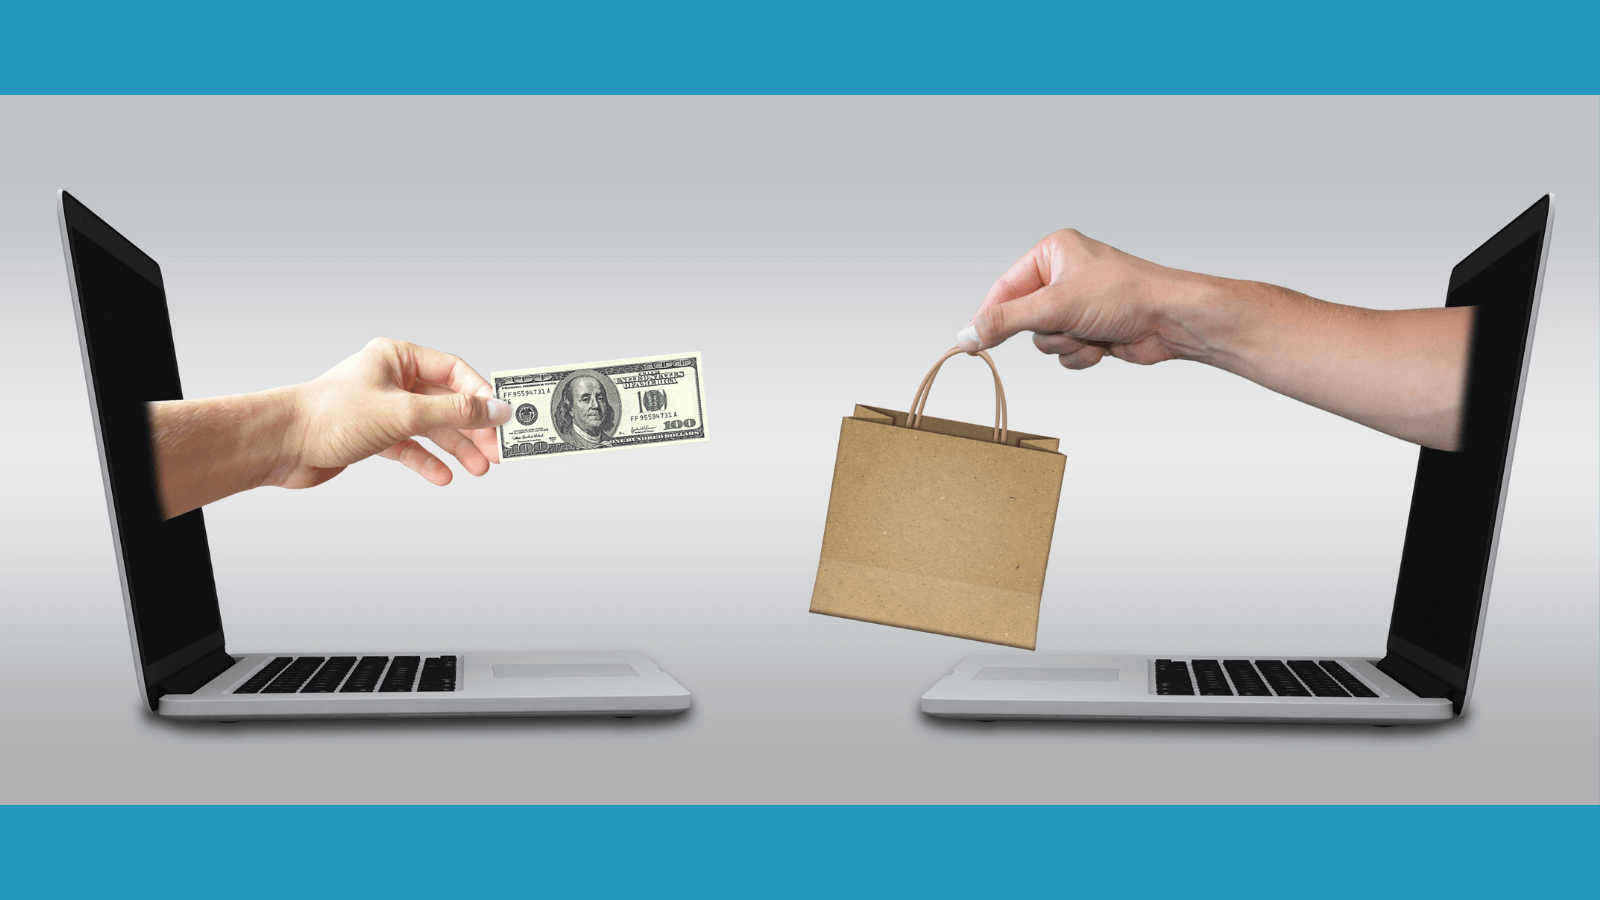 A hand holding a $100 bill and a hand holding a shopping bag reaching towards each other from computer screens